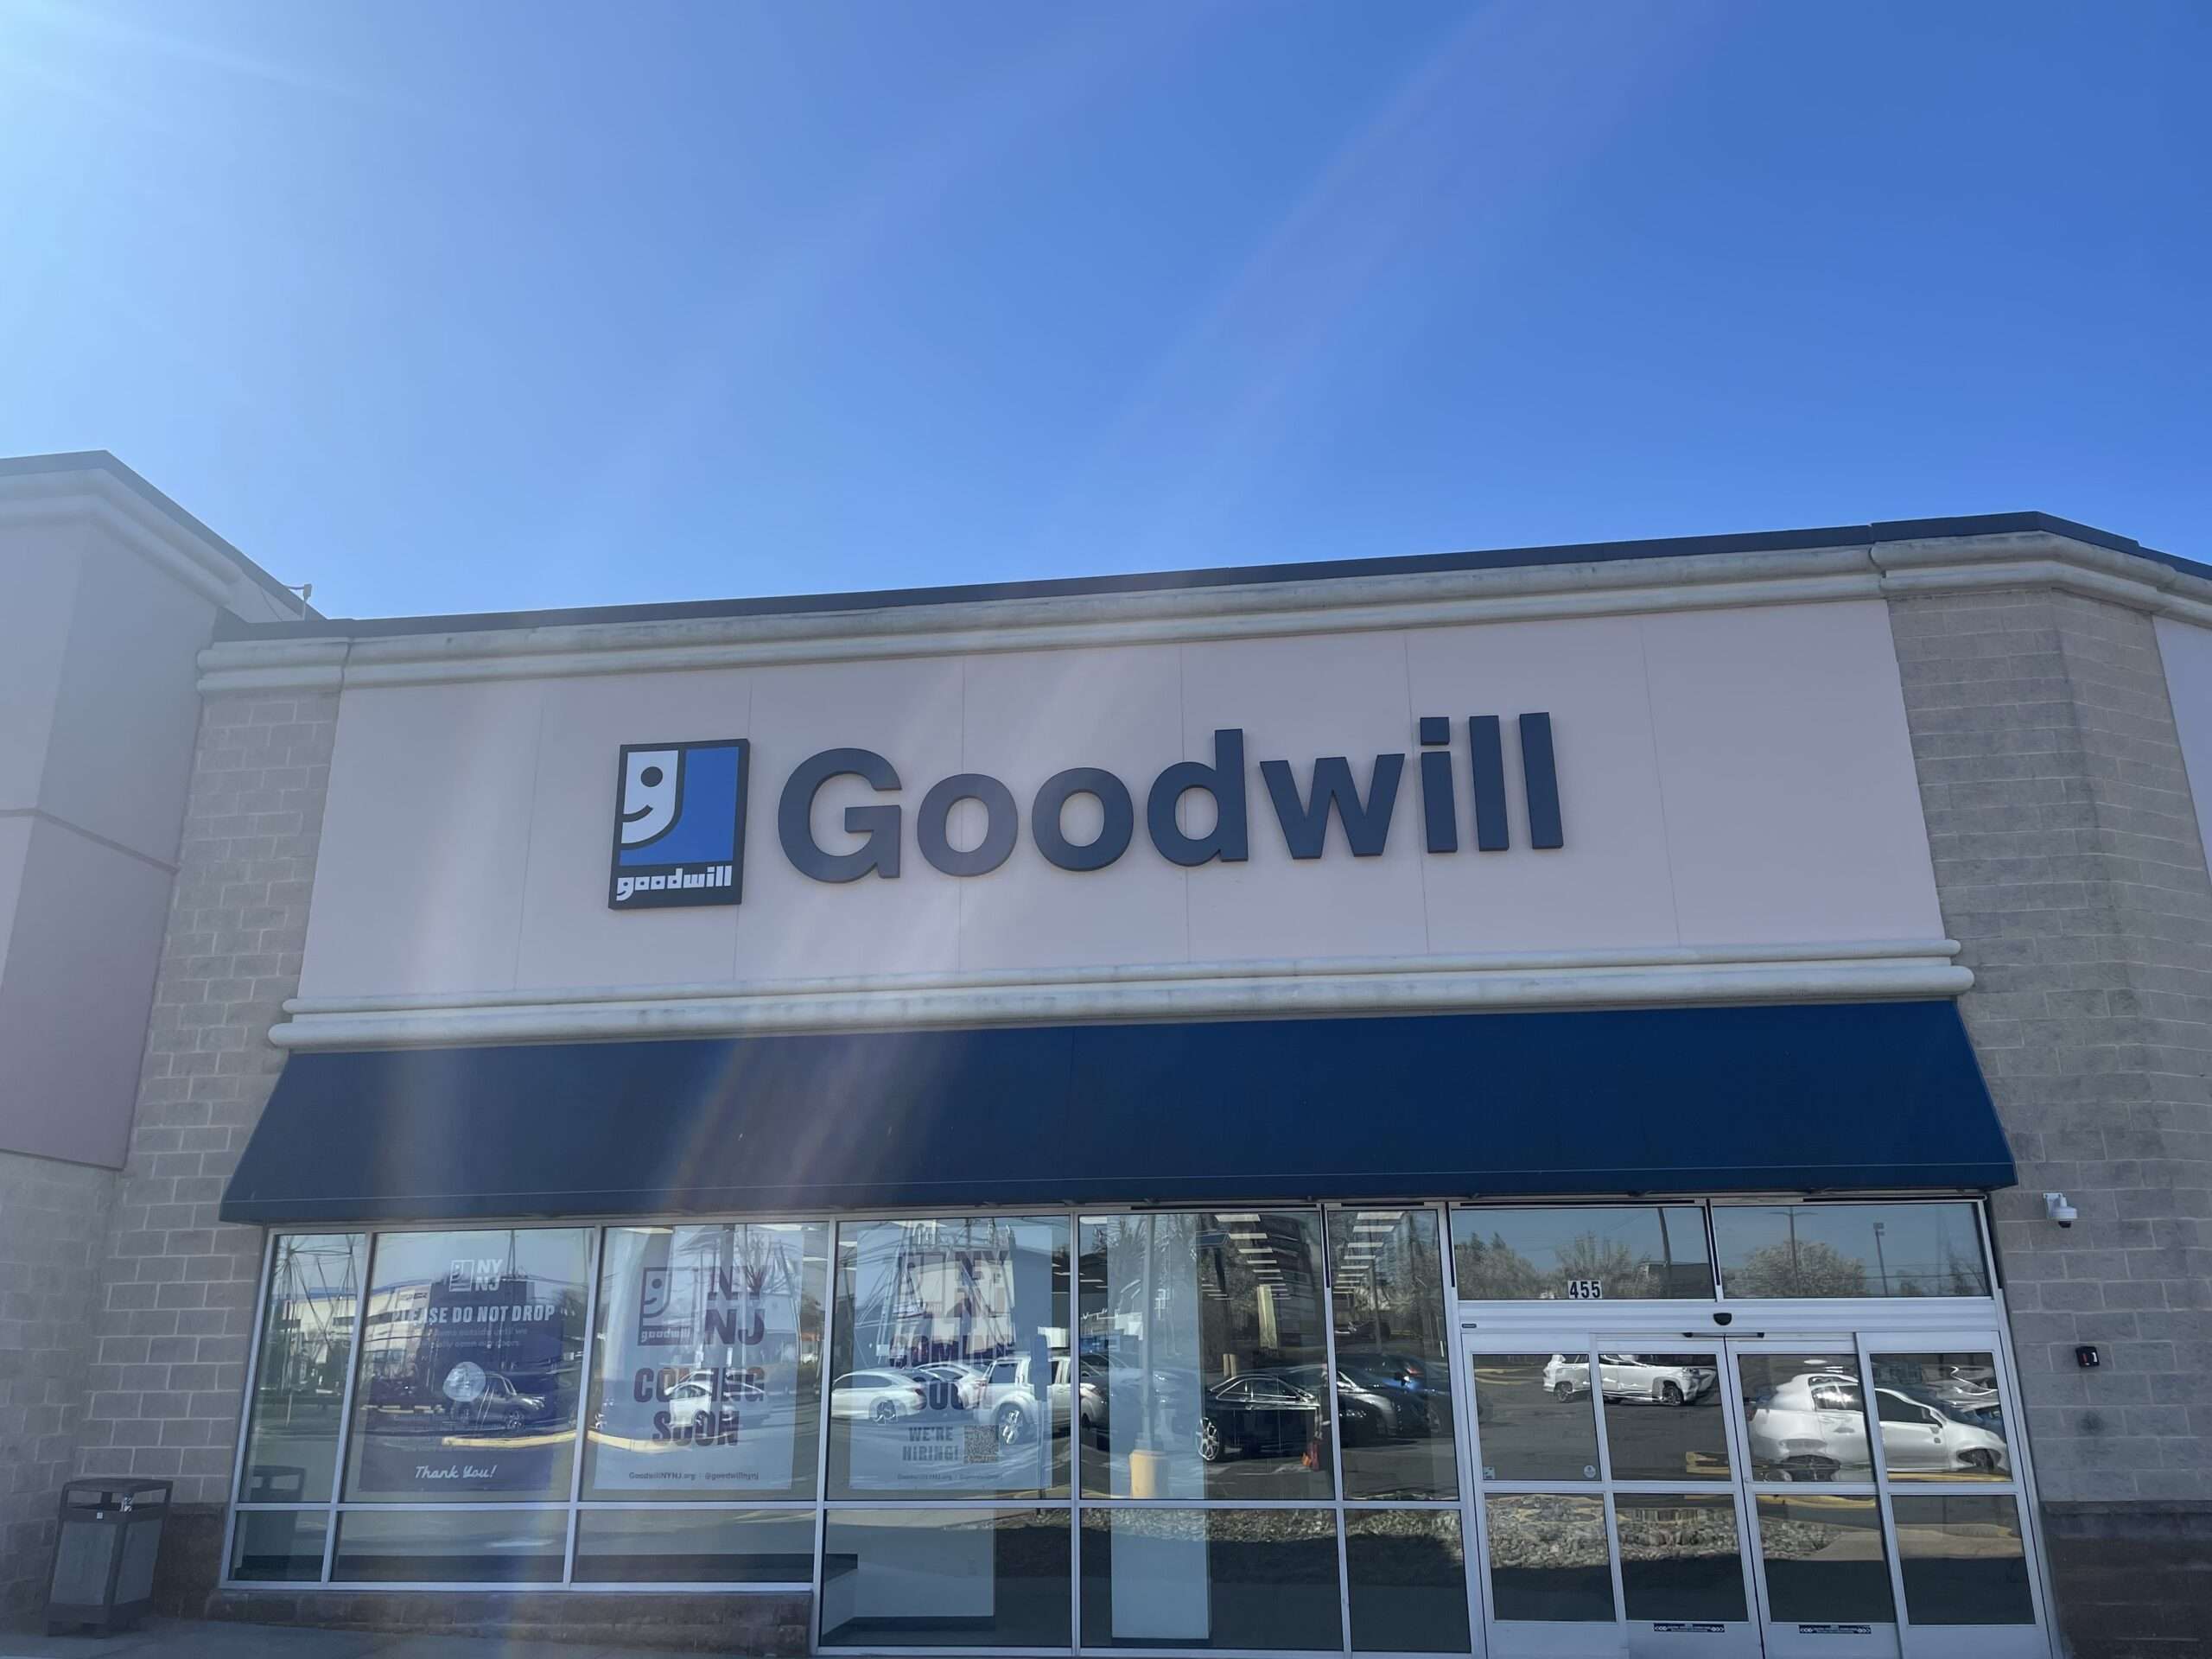 Exterior view of a Goodwill retail store on a sunny day, with the Goodwill logo prominently displayed above the entrance, reflecting a clear blue sky in its large front windows.